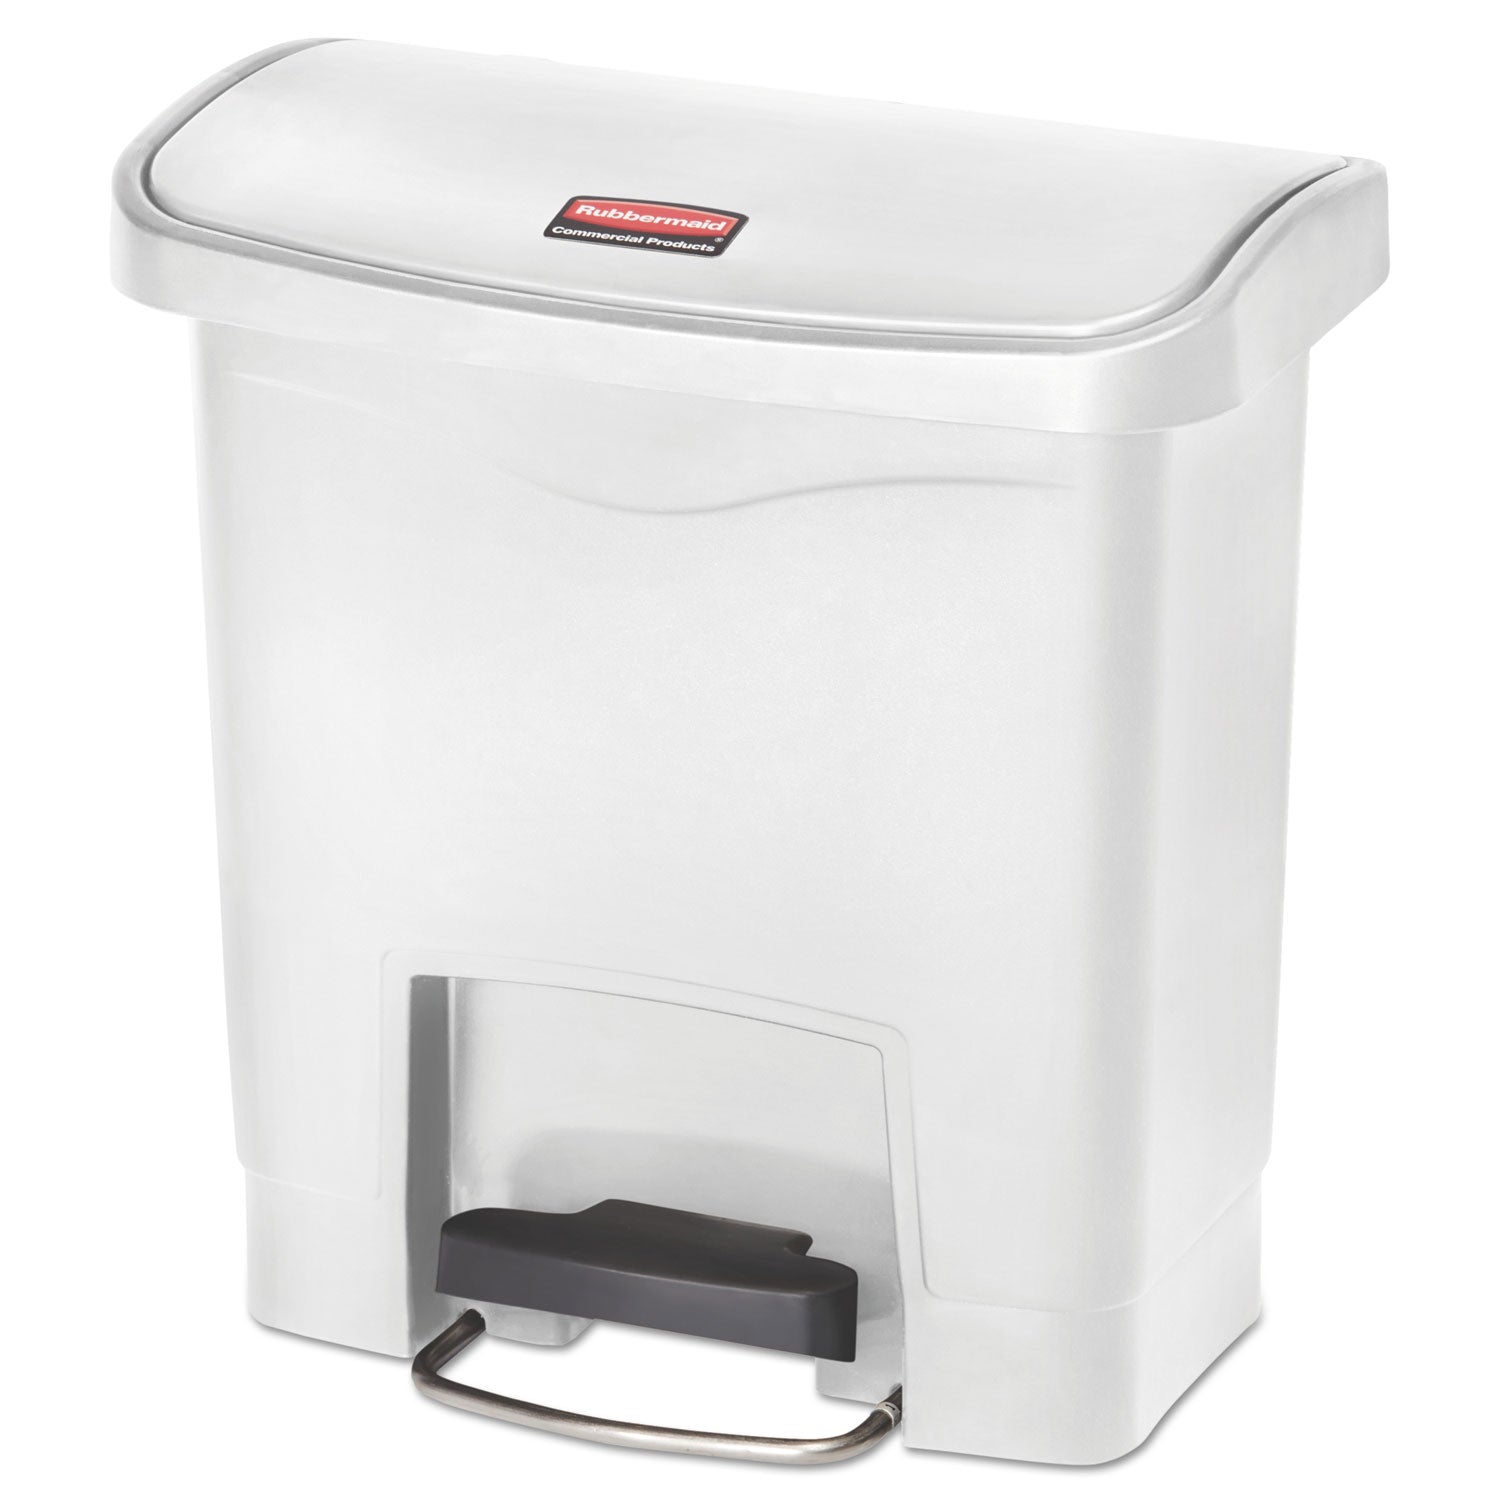 slim-jim-streamline-resin-step-on-container-front-step-style-4-gal-polyethylene-white_rcp1883554 - 1